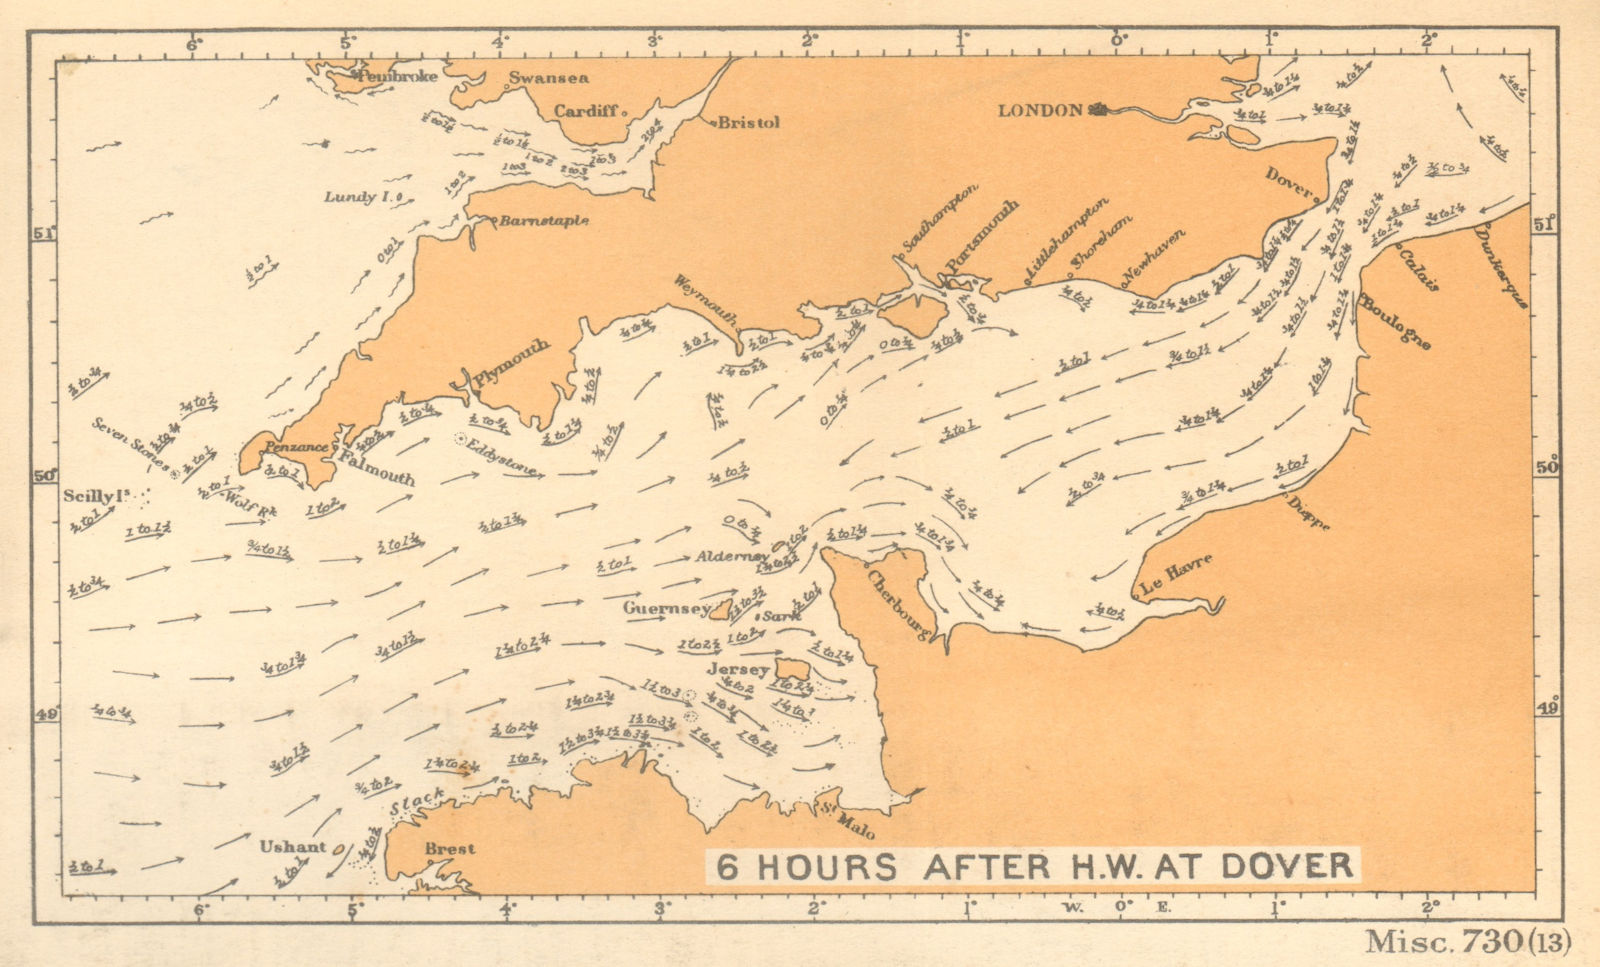 English Channel currents 6 hours after high water at Dover. ADMIRALTY 1943 map